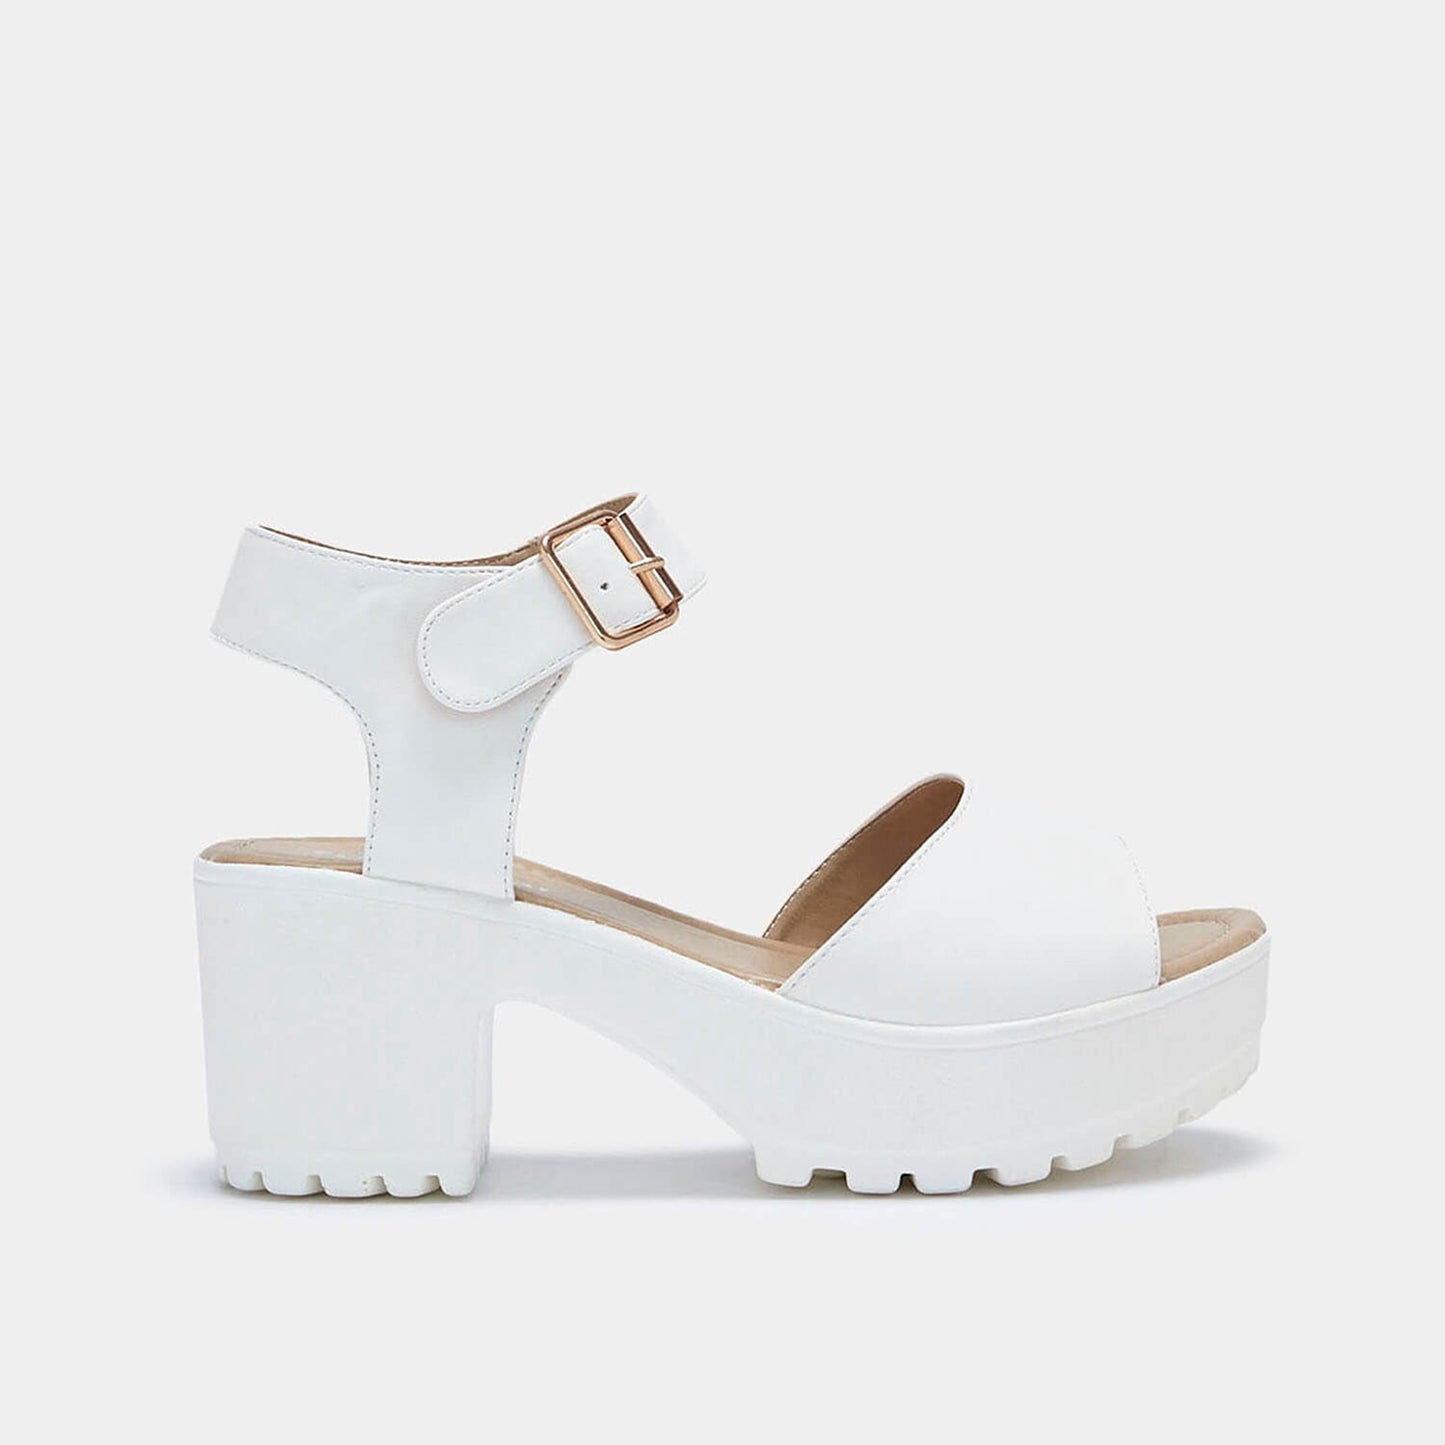 LOR White Chunky Sandals - Sandals - KOI Footwear - White - Side View